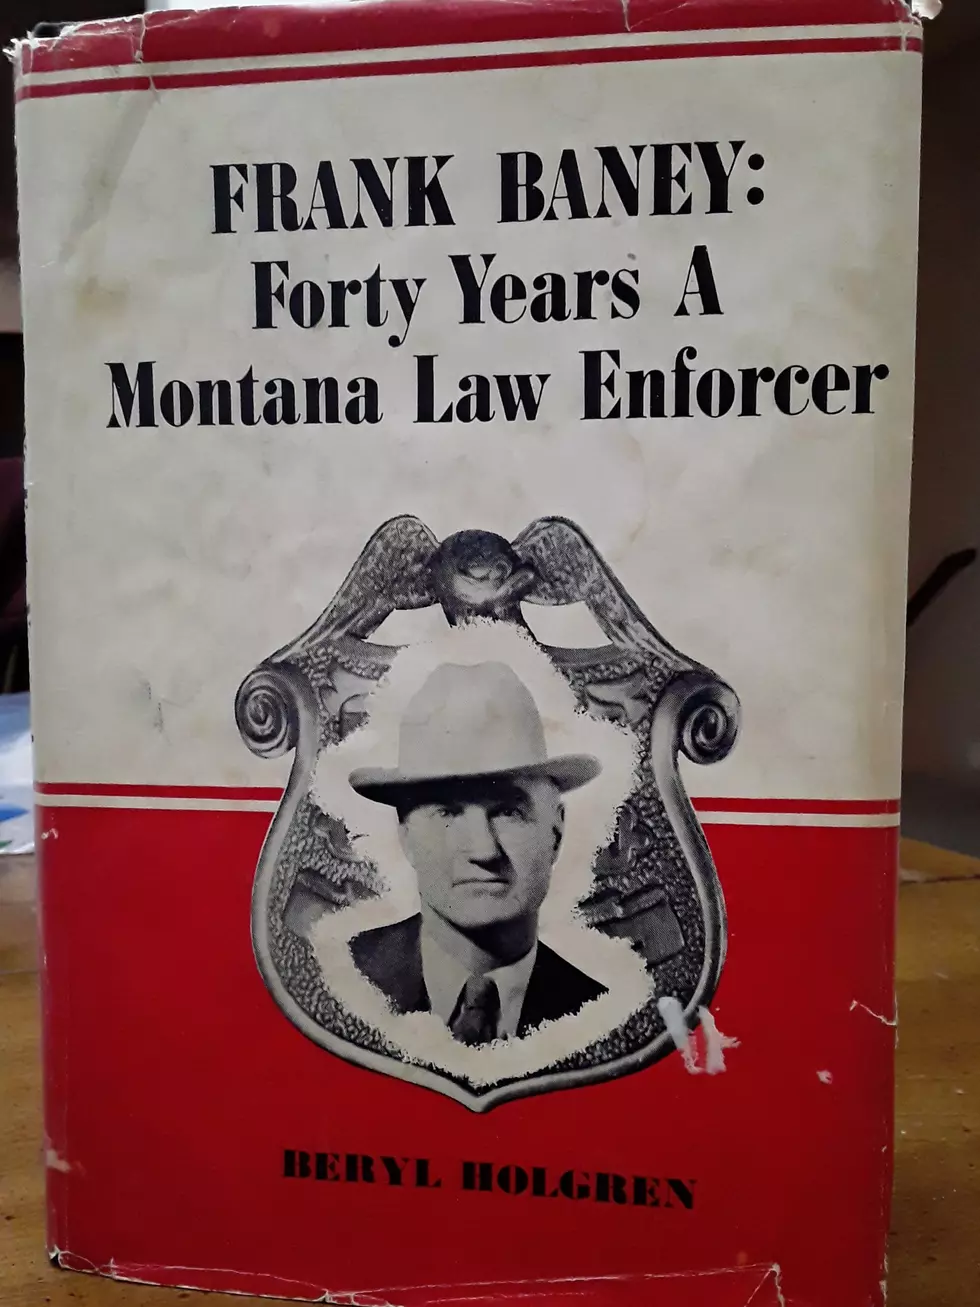 Harmon&#8217;s Histories: Sheriff Frank Baney served Lincoln County with courage, compassion